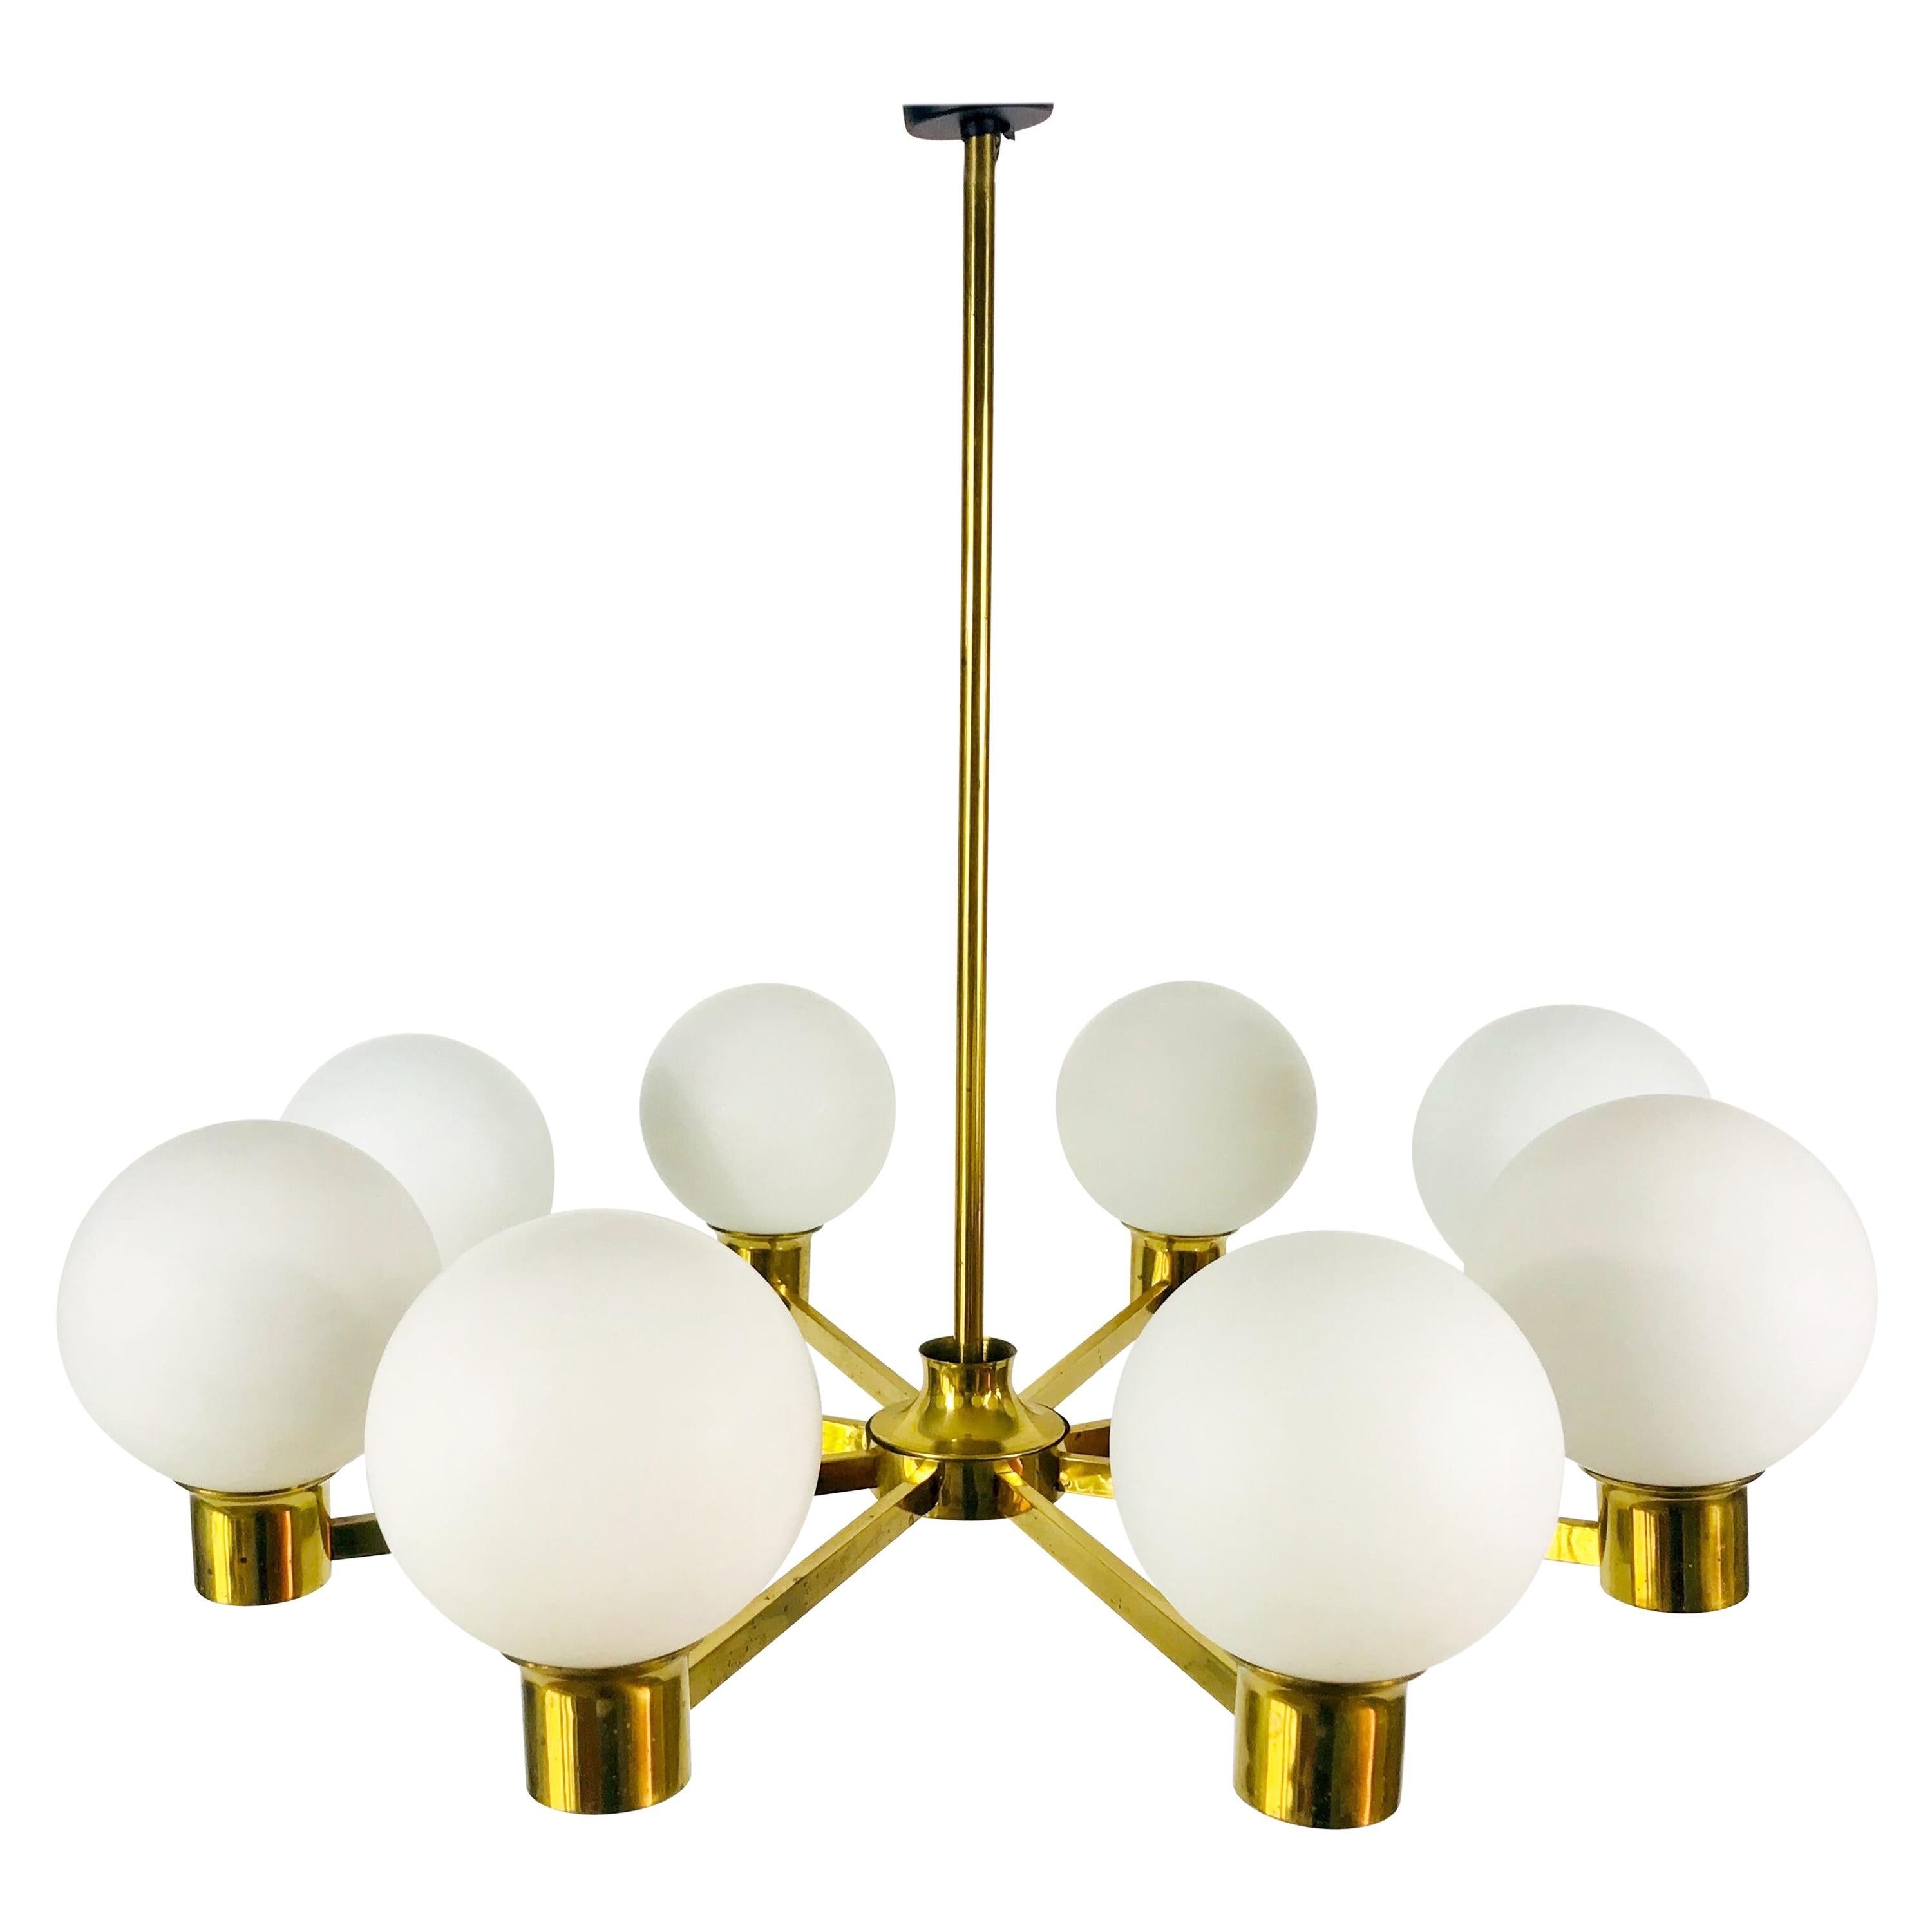 Rare Midcentury 8-Arm Brass and Opaline Glass Chandelier, 1960s For Sale